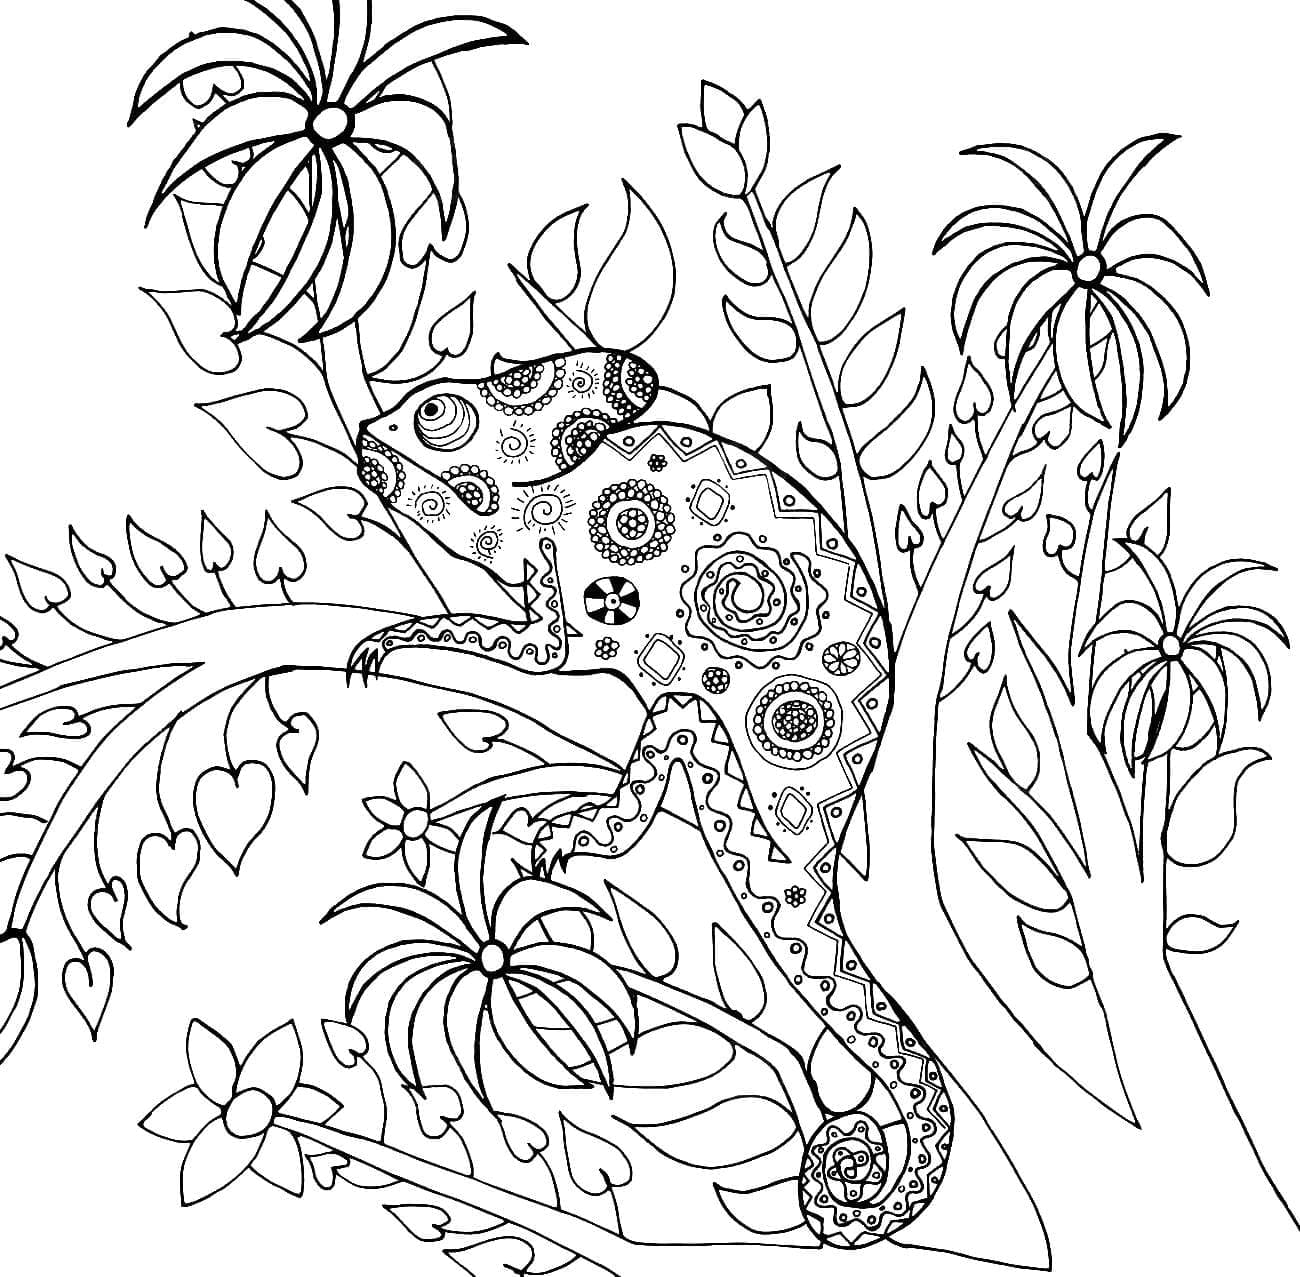 Chameleon in the Tree coloring page - Download, Print or Color Online ...